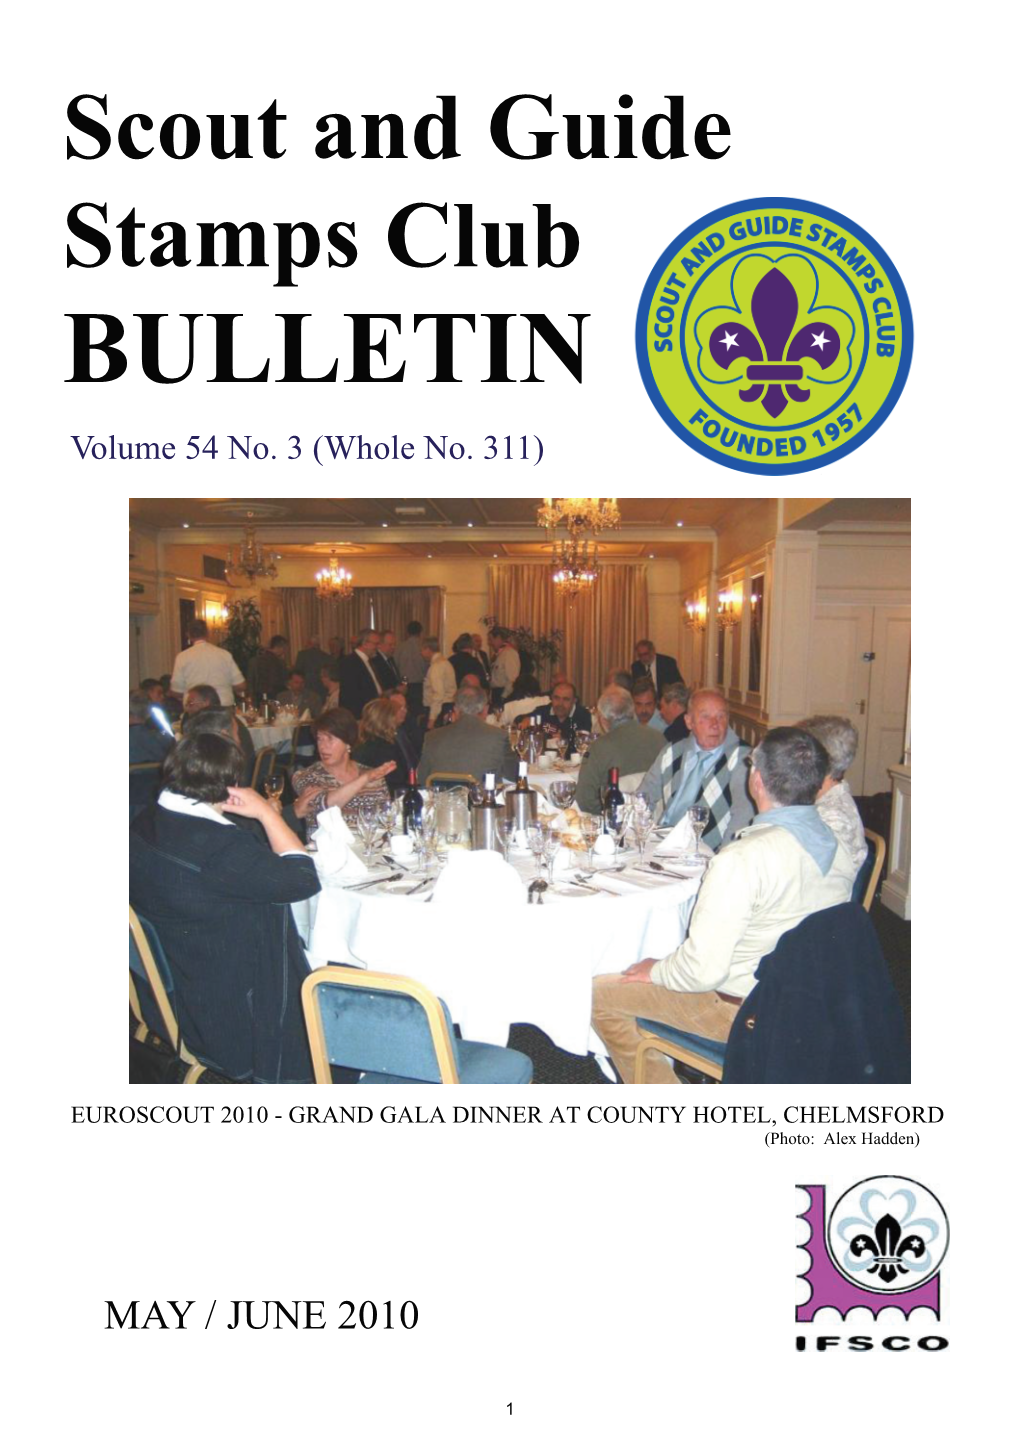 Scout and Guide Stamps Club BULLETIN #311